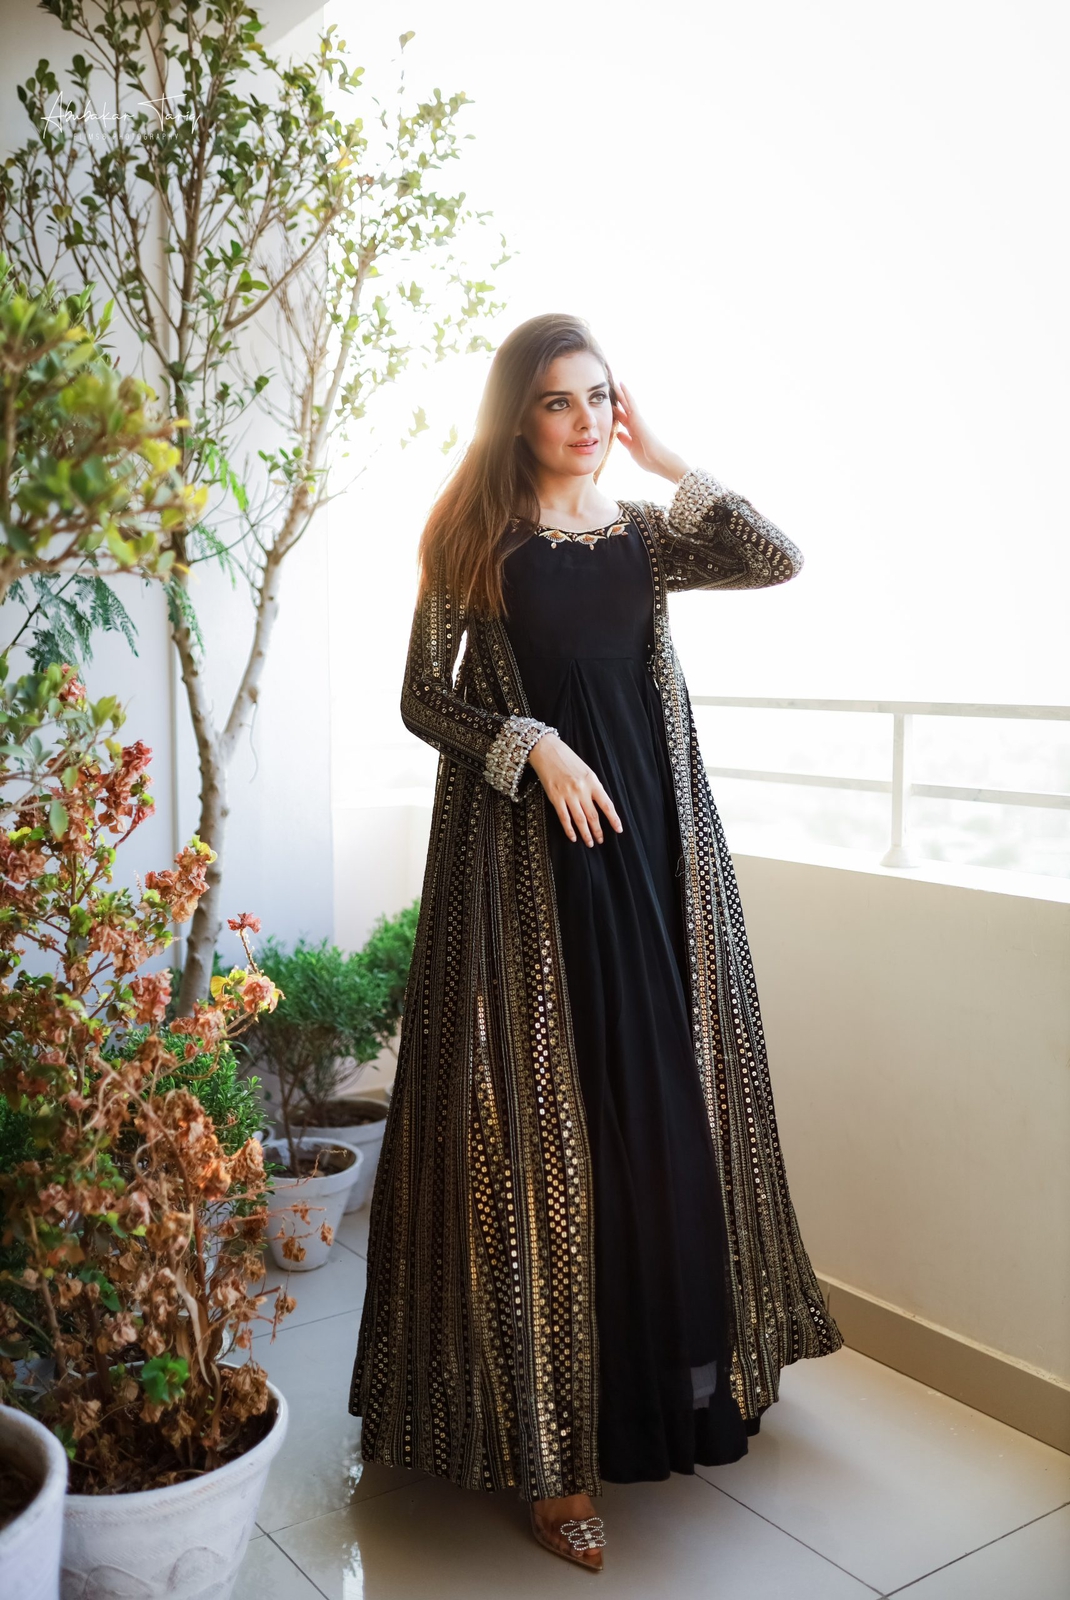 His Dark Queen - ~ Chapter -12 ~ | Indian gowns dresses, Fashion dresses, Black  gown dress